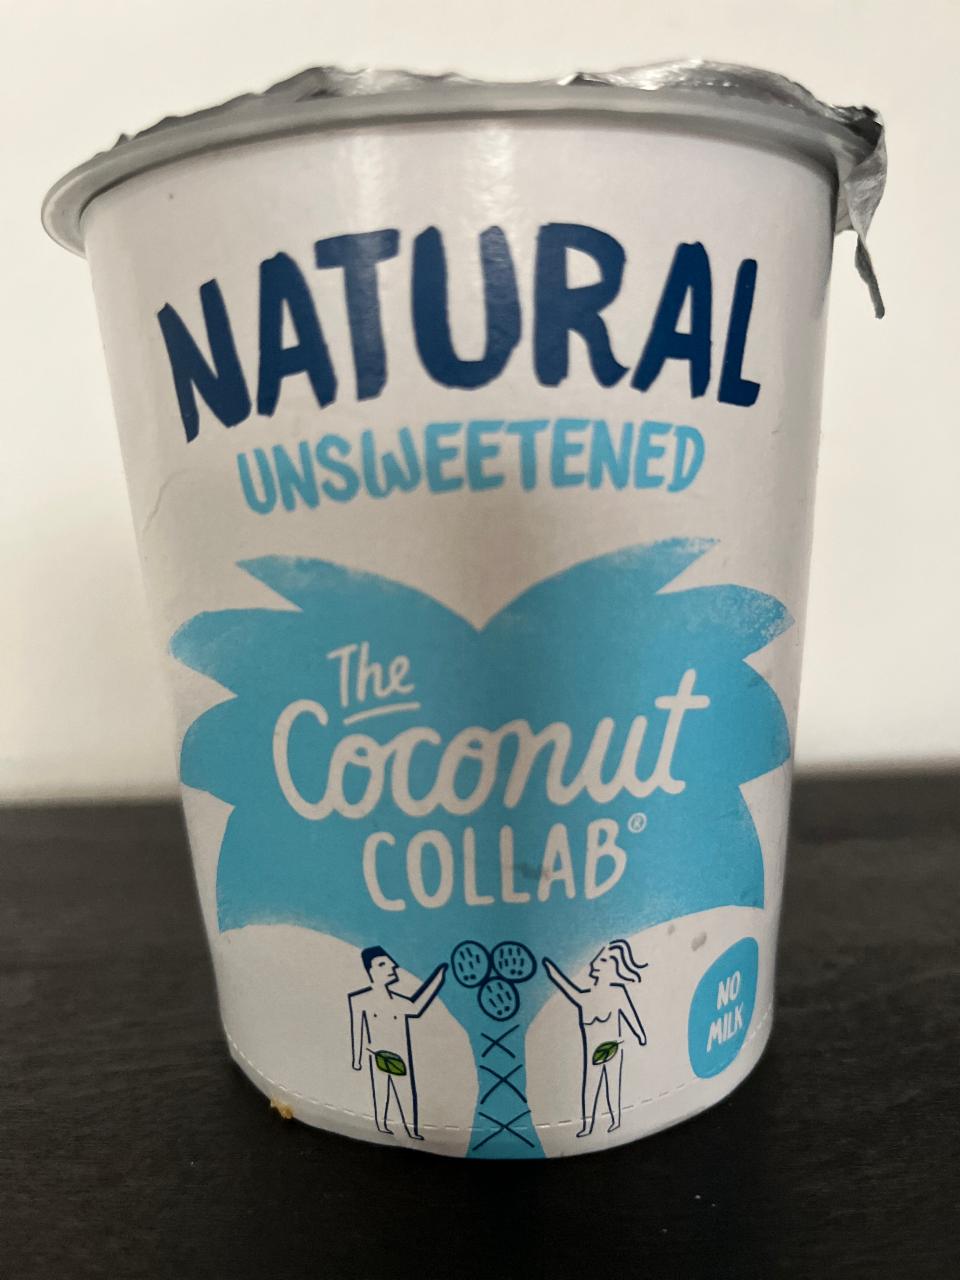 Fotografie - Natural unsweetened The Coconut Collab